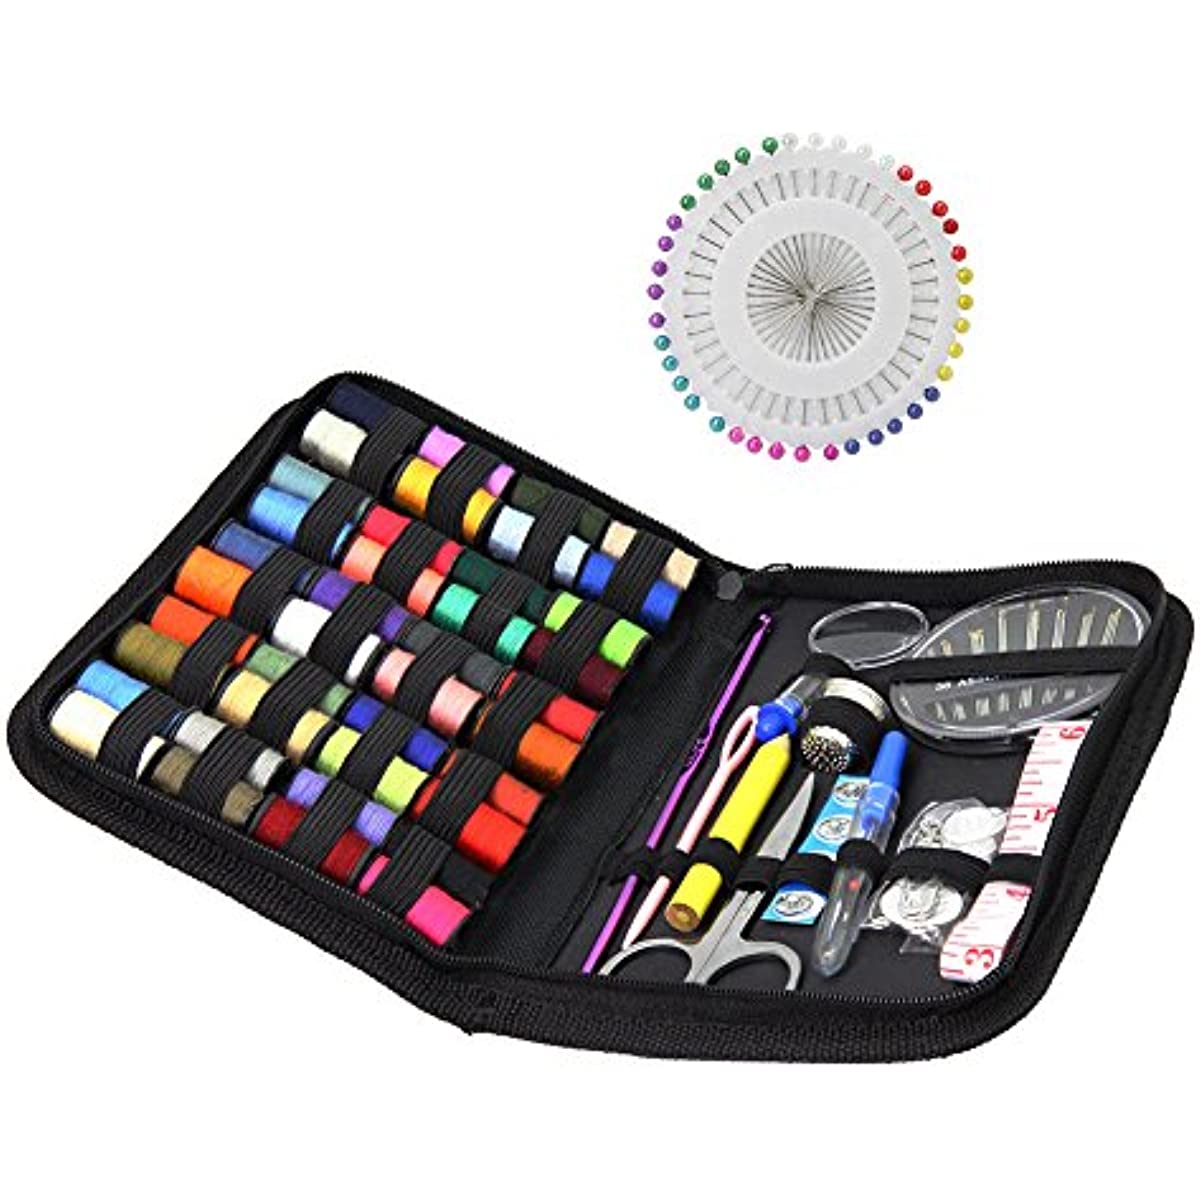 Qmisify Portable Sewing Kit, 49g CottonMini Sew Supplies Set, DIY Sewing  Kit, Sewing Accessories Set, Compact Mini Sewing Kit for Kids, Girls